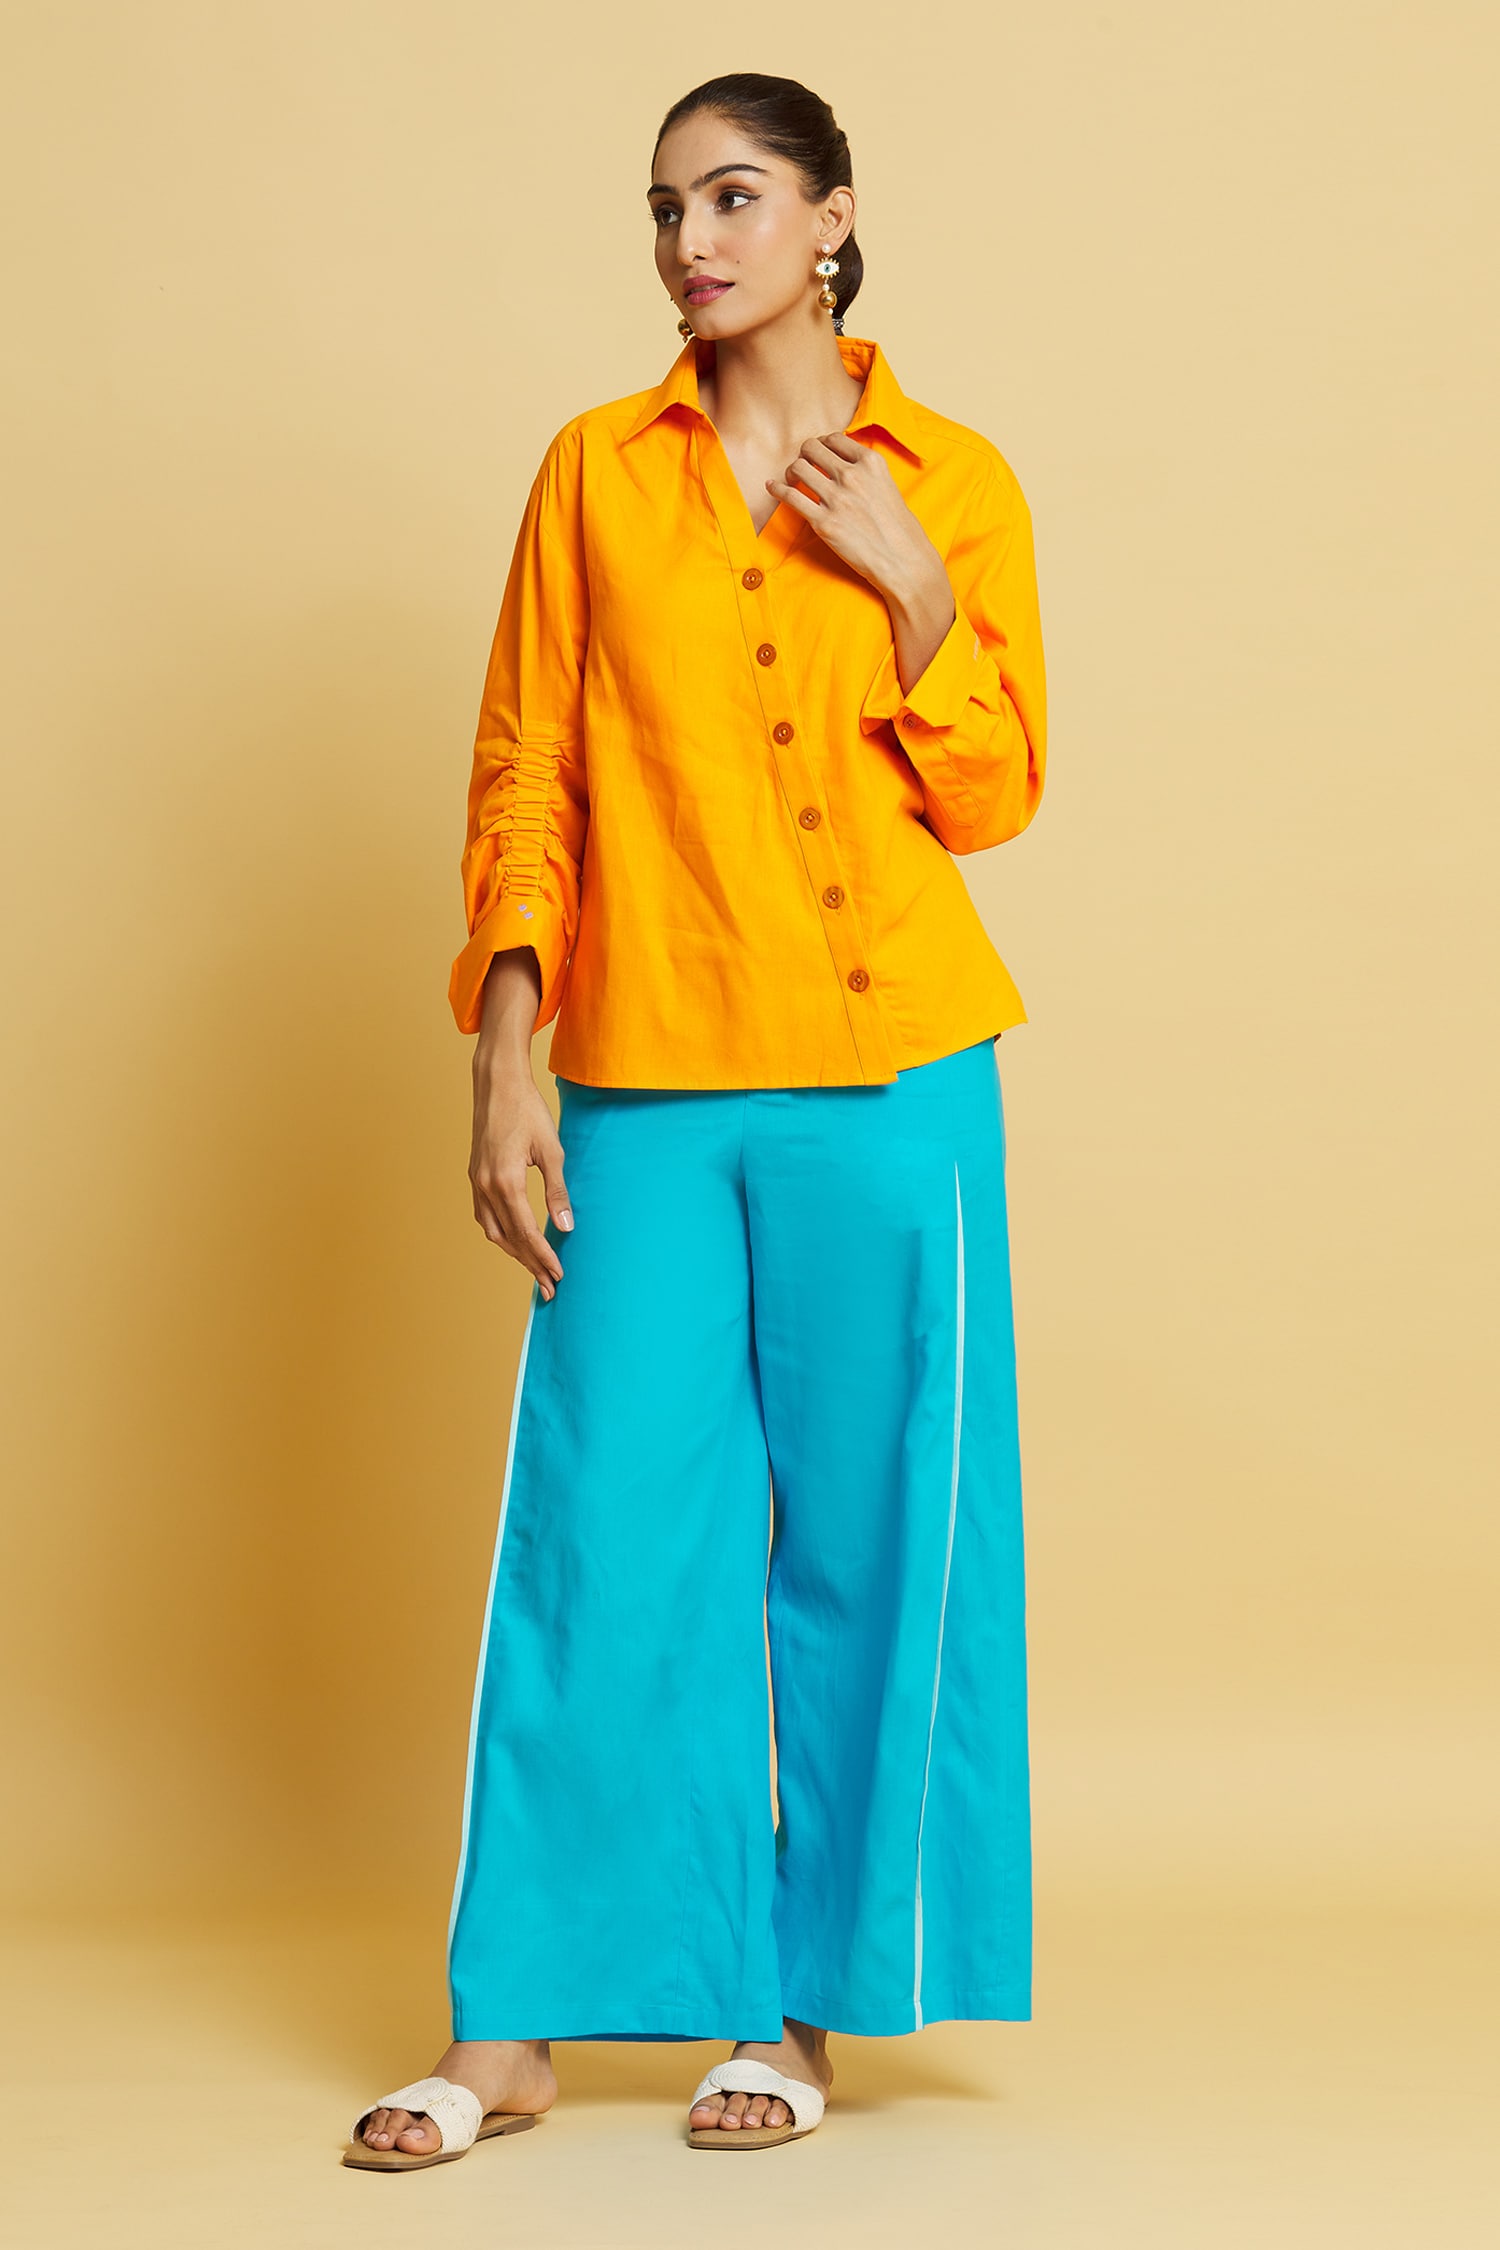 Fashionable Girl Posing in Green Summer Trousers and Yellow T-shirt on Grey  and Blue Stock Photo - Image of model, fashion: 182510170